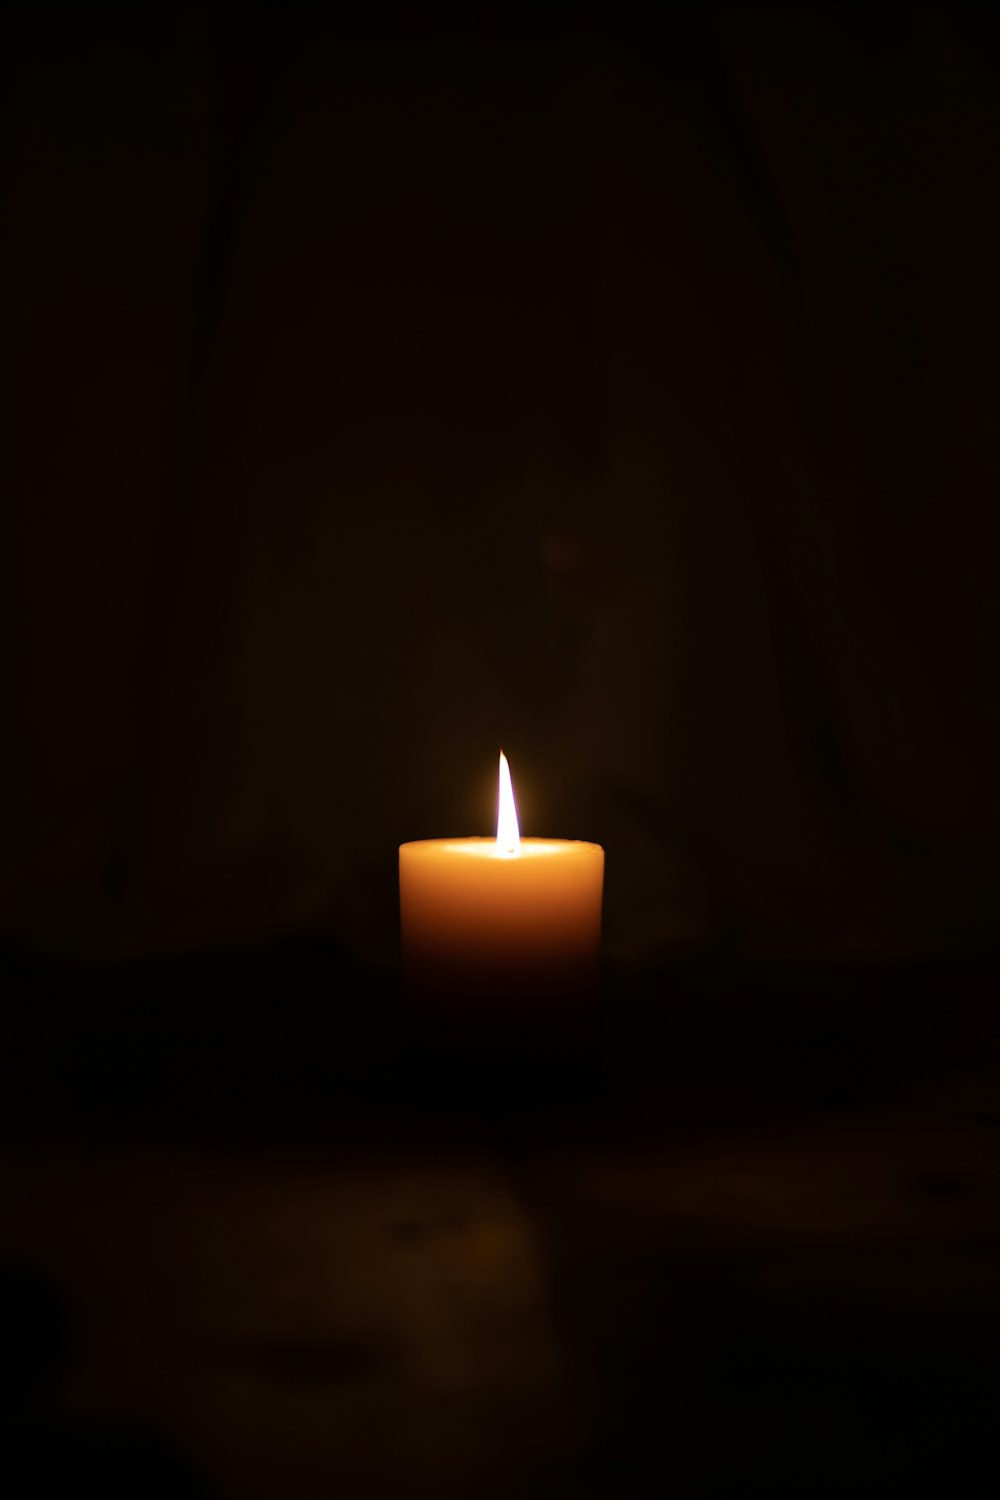 Lit Candle Pictures | Download Free Images on Unsplash